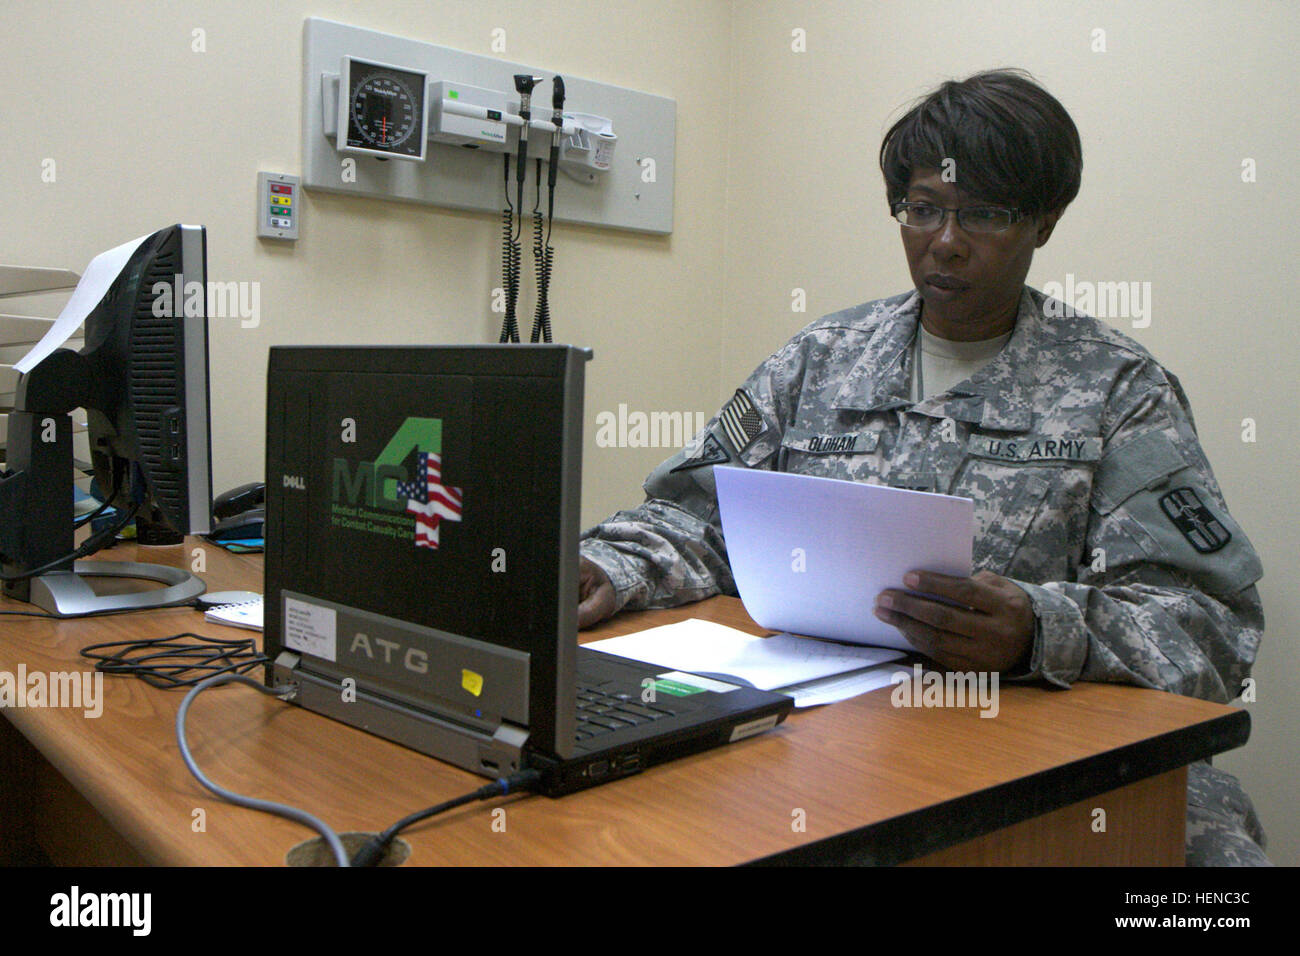 Col. Lorrie Oldham, deputy commander for Clinical Services at Camp Arifjan, Kuwait, with the 452nd Combat Support Hospital (Forward), reviews notes Feb. 24, 2014. Oldham is one of two black female colonels currently deployed to Camp Arifjan. (U.S. Army photo by Sgt. Jennifer Spradlin, U.S. Army Central public affairs) In the spotlight, Army colonel leads by example 140224-A-OP586-564 Stock Photo